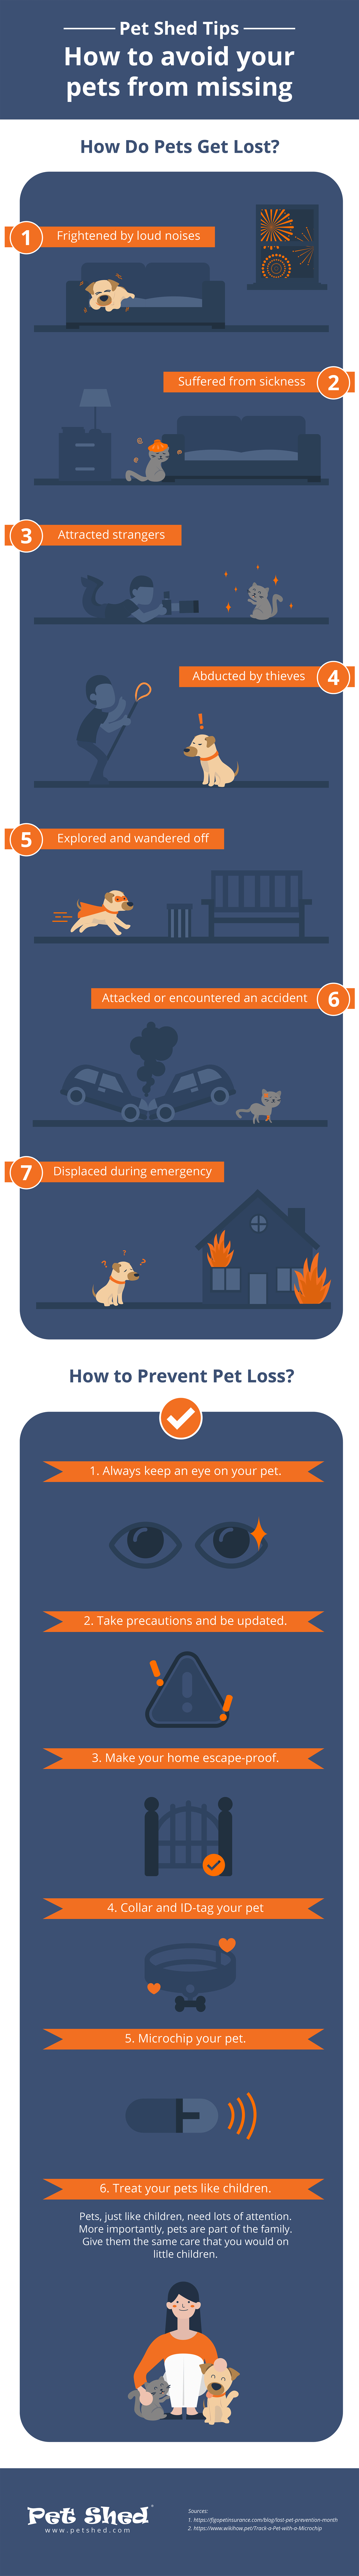 National Lost Pet Prevention Month Infographic